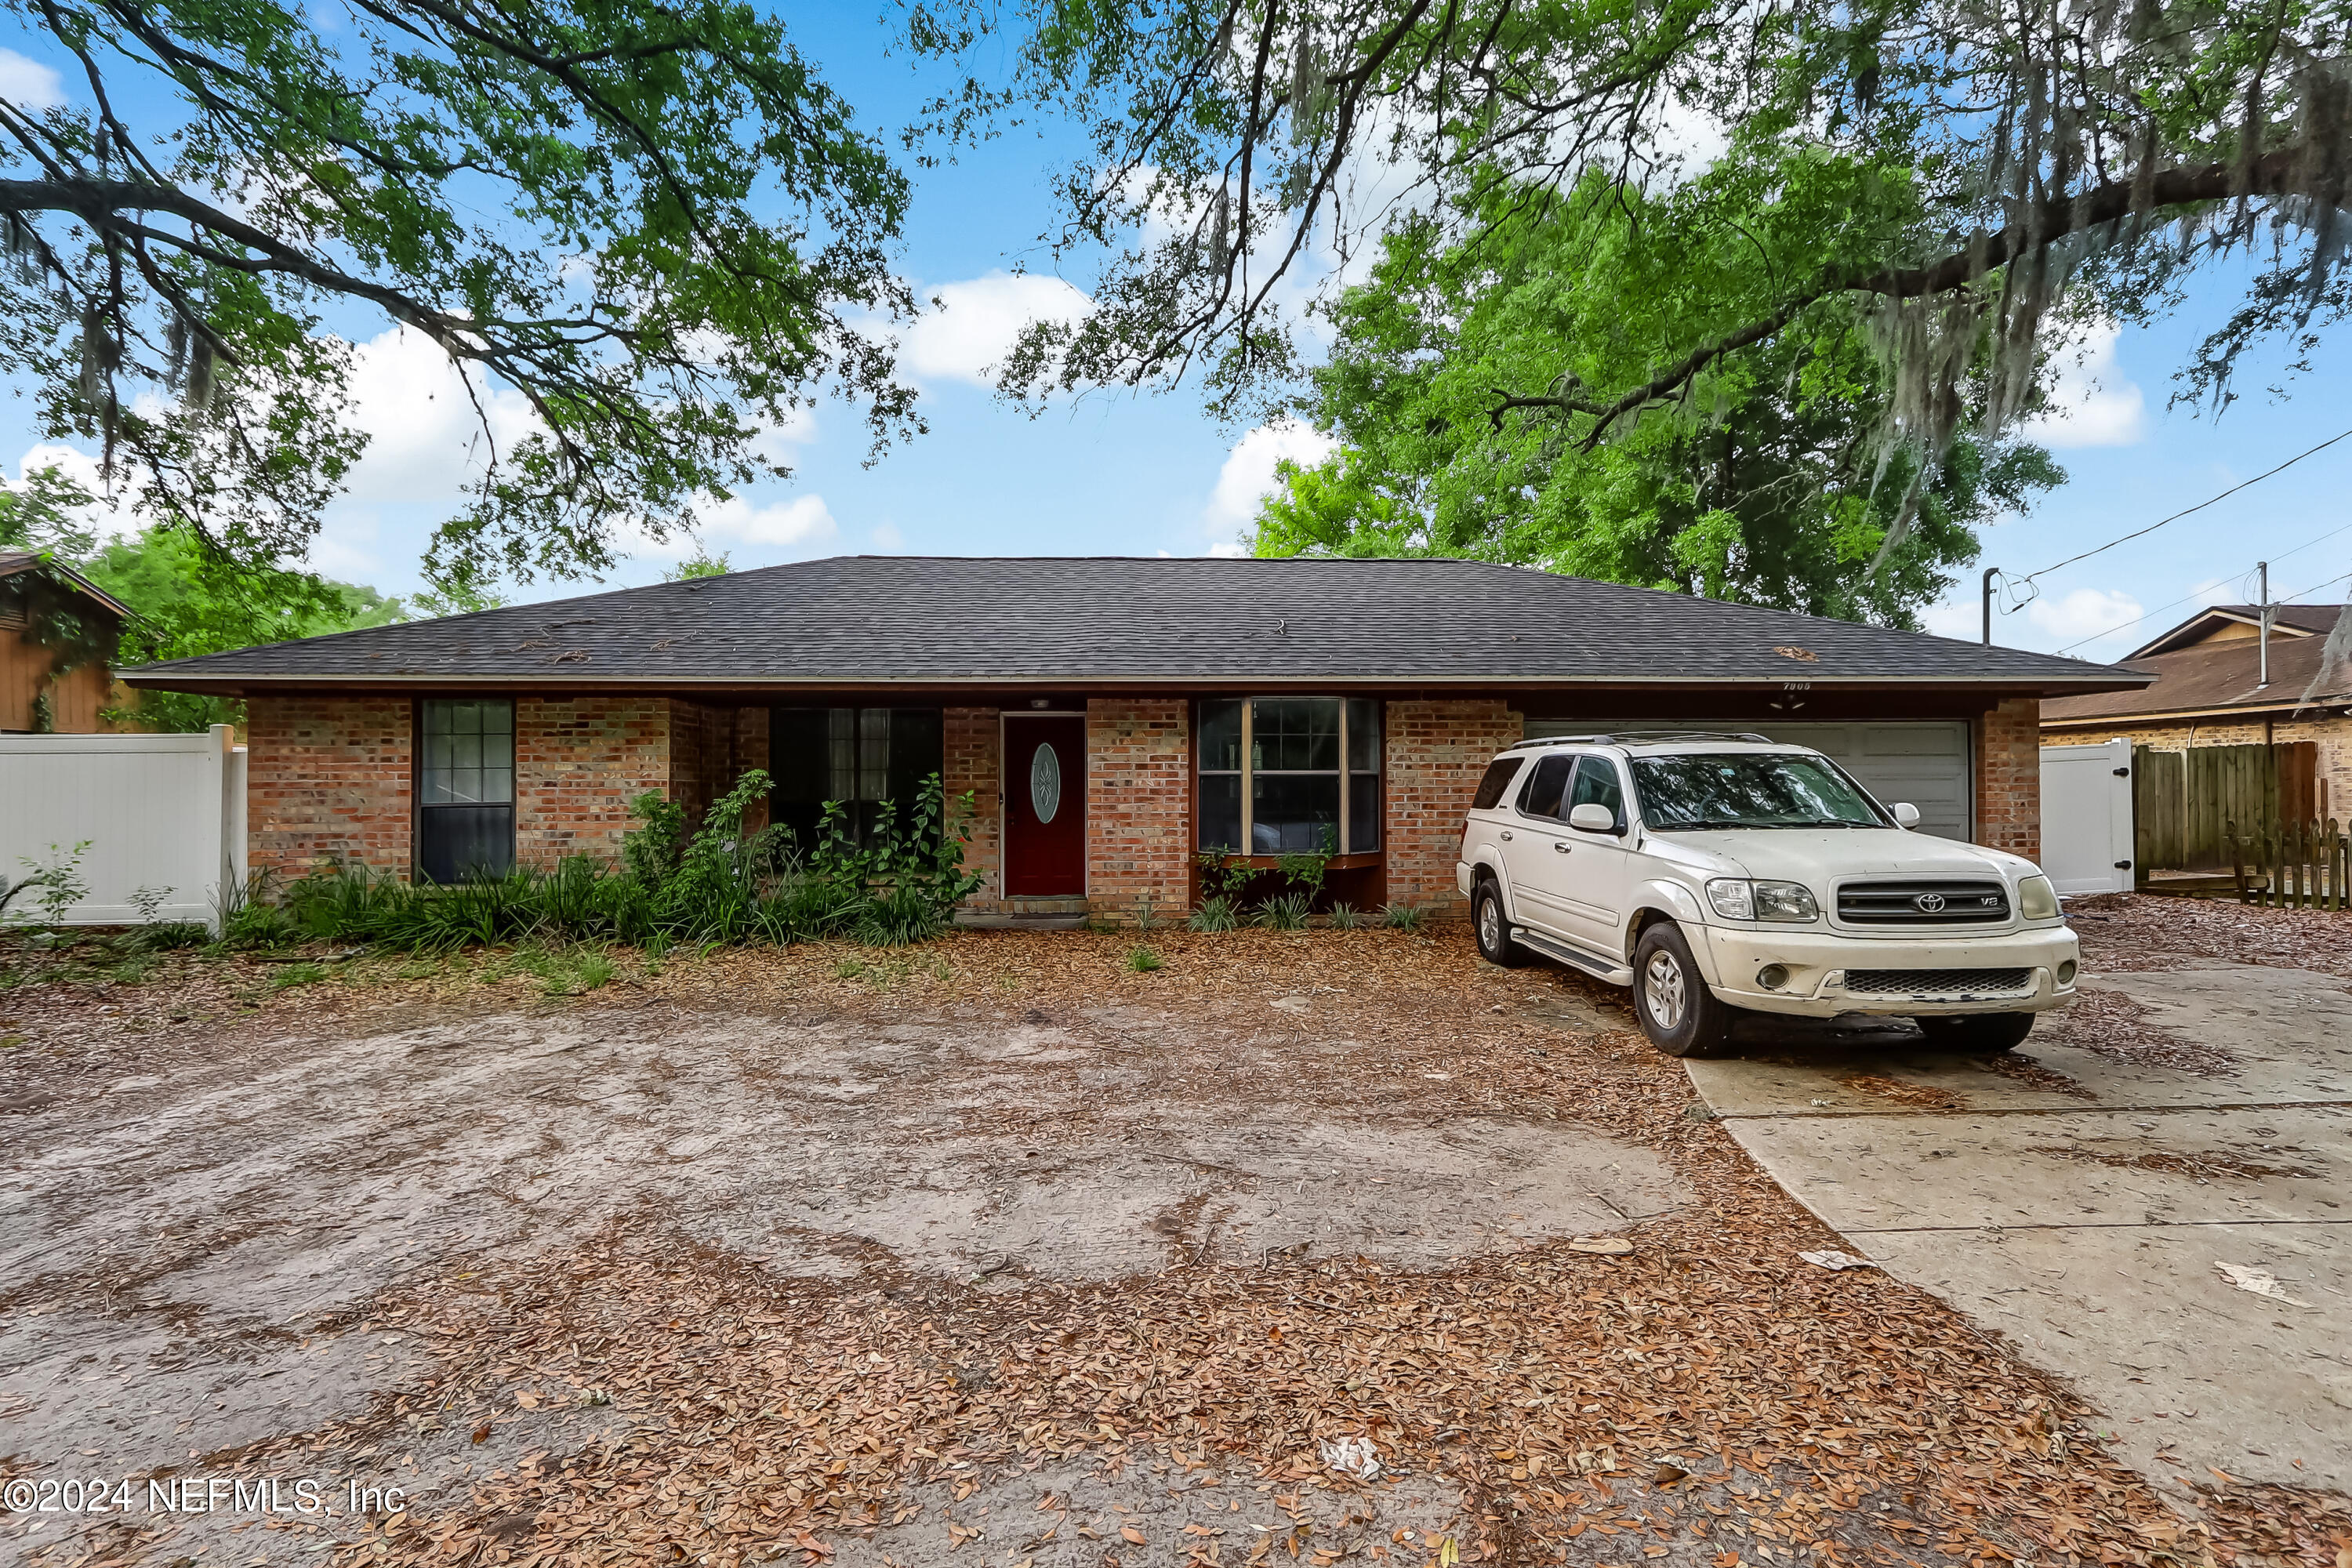 Jacksonville, FL home for sale located at 7905 118th Street, Jacksonville, FL 32244